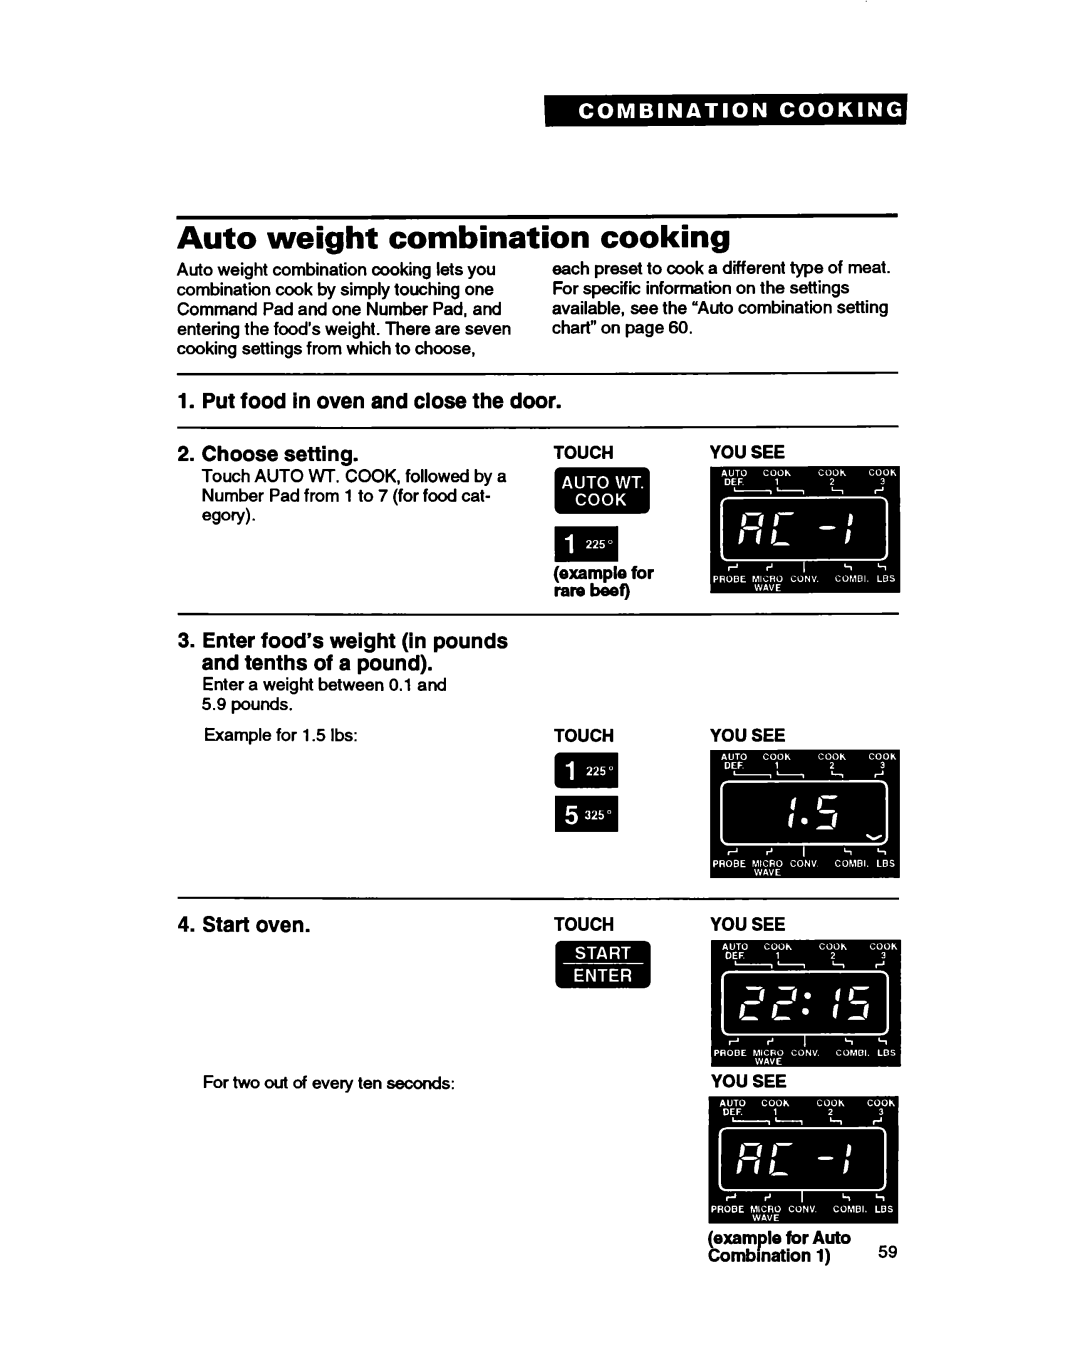 Whirlpool MC8130XA Auto weight combination, cooking, rarebee9, example for Auto Combmation, Choose setting, Start oven 